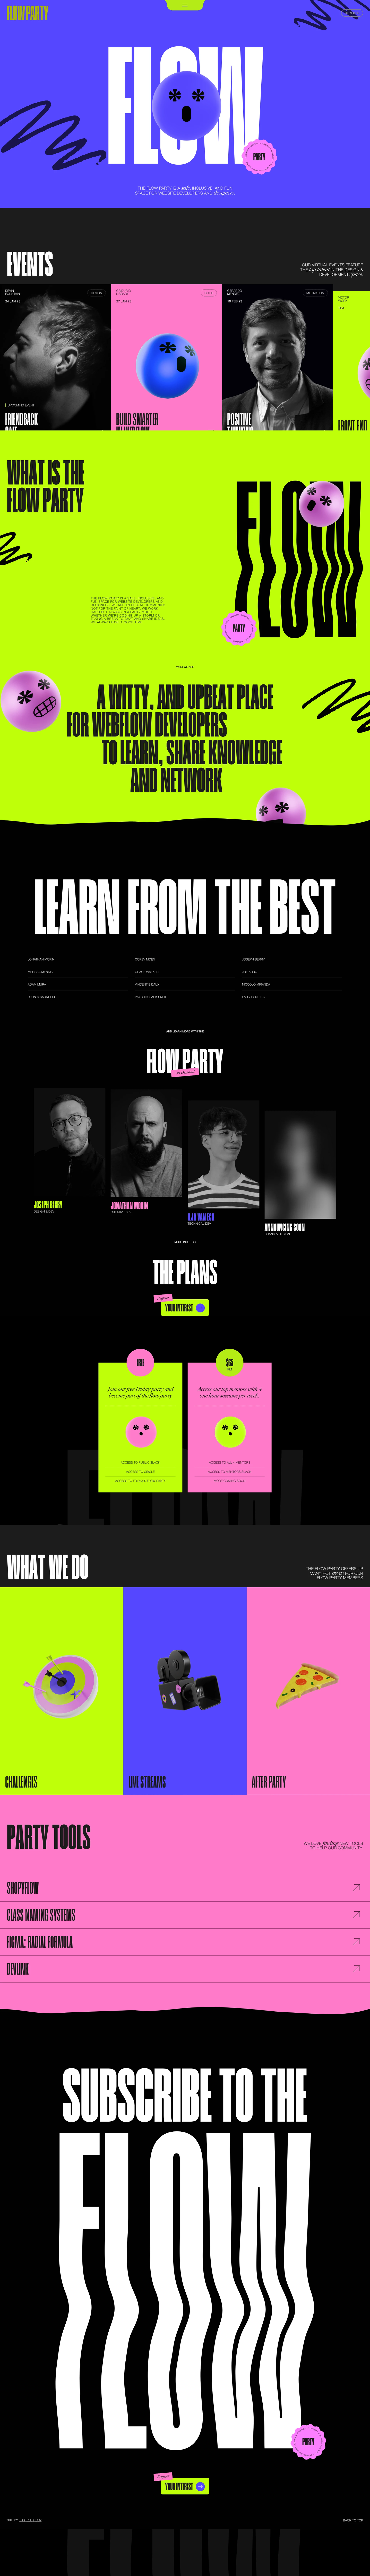 The Flow Party Landing Page Example: The Flow Party is a safe, inclusive, and fun space for website developers and designers. Our virtual events feature the top talent in the design & development space.